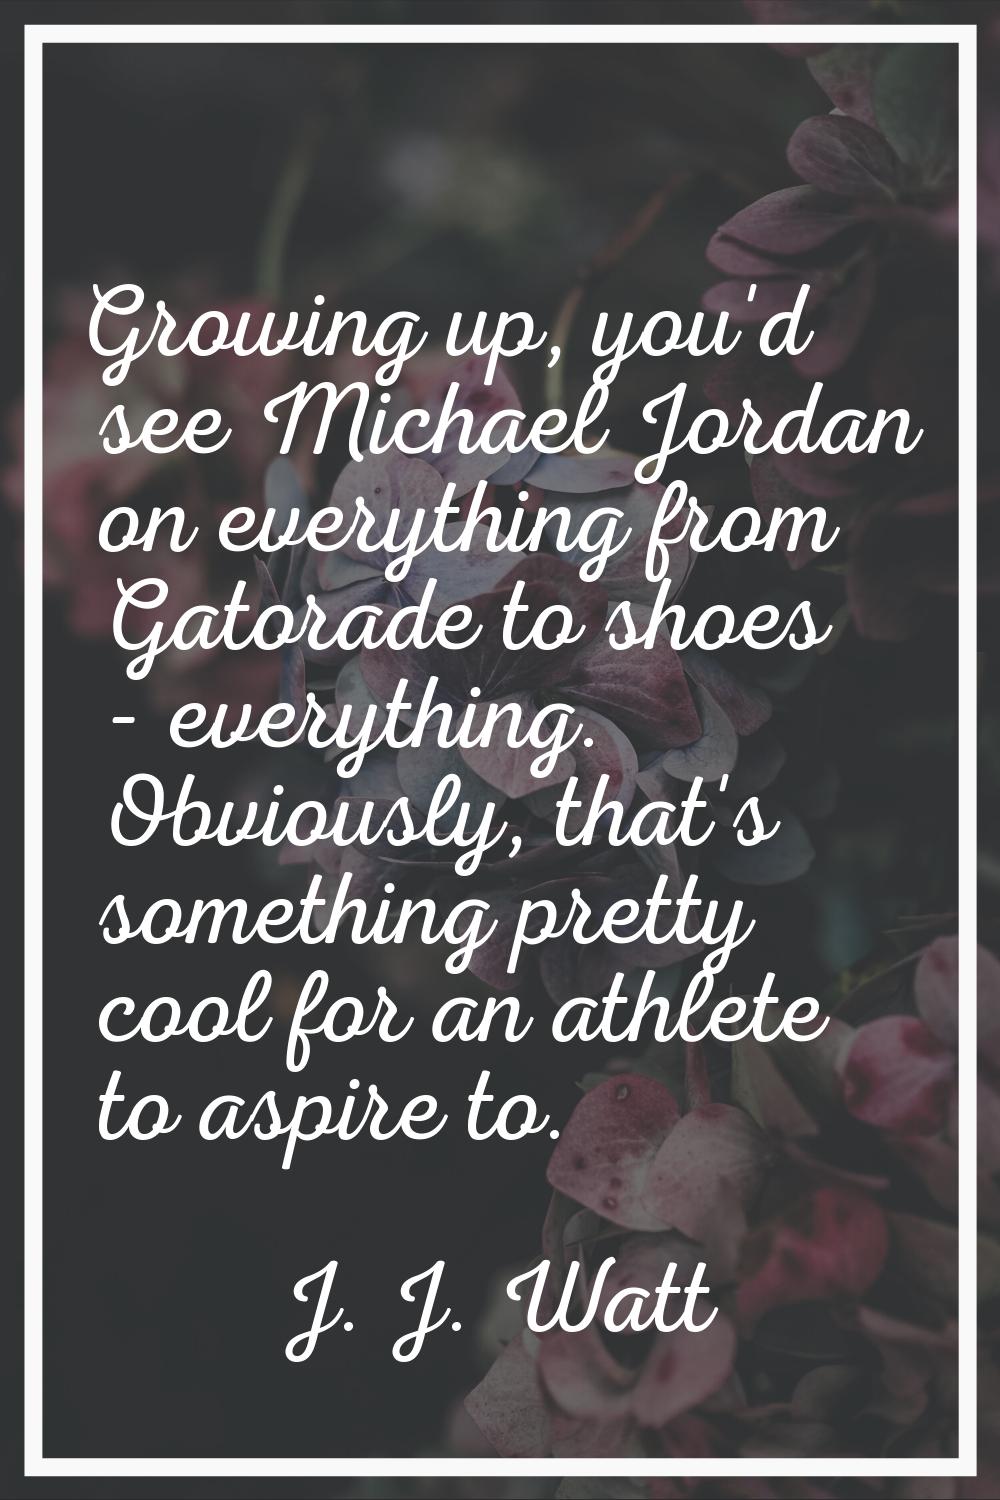 Growing up, you'd see Michael Jordan on everything from Gatorade to shoes - everything. Obviously, 